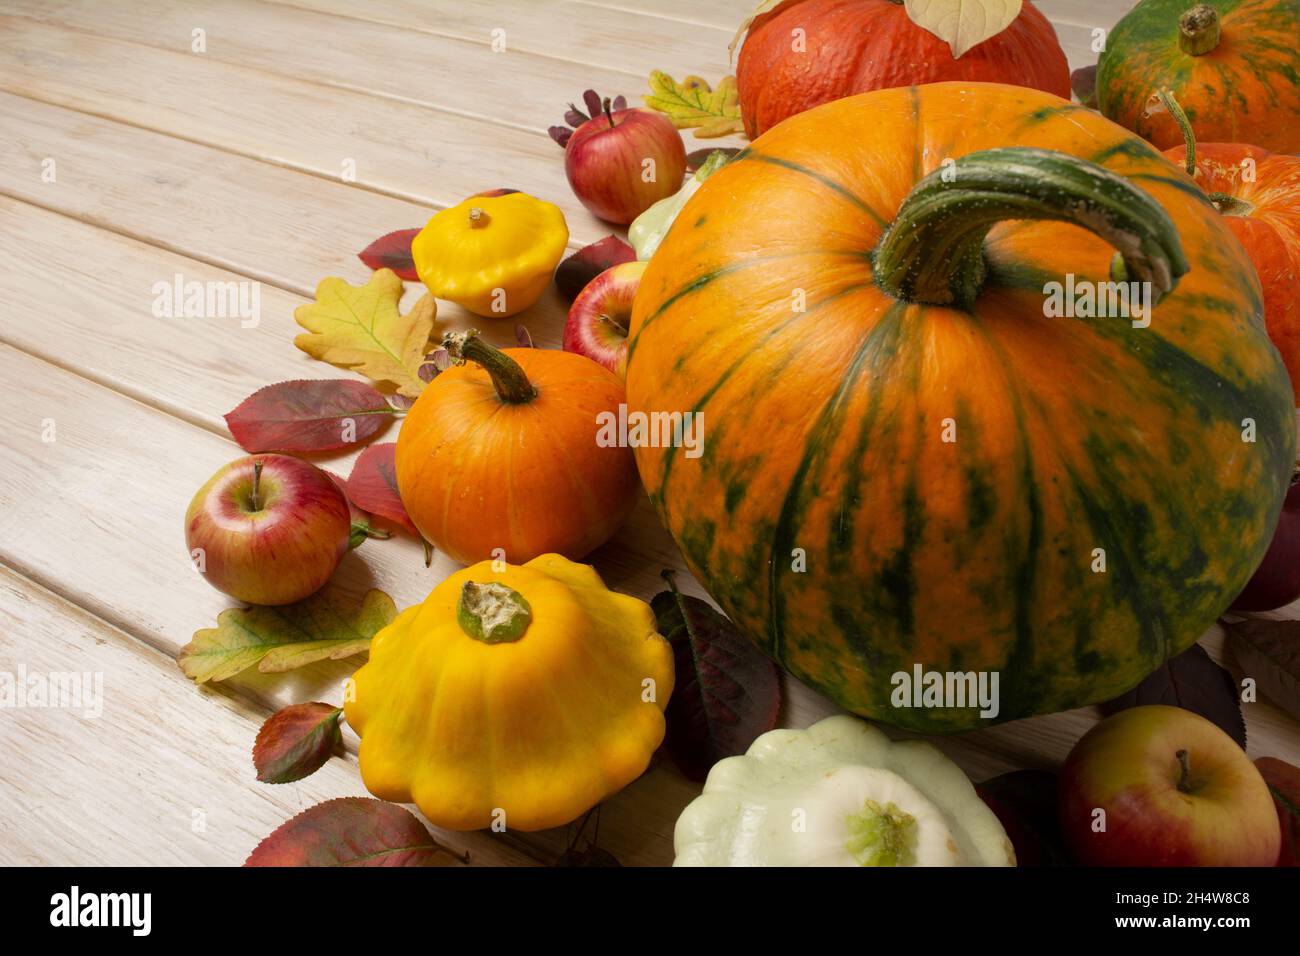 Thanksgiving background with small and big pumpkins, yellow squash and apples on the white wooden table, copy space Stock Photo